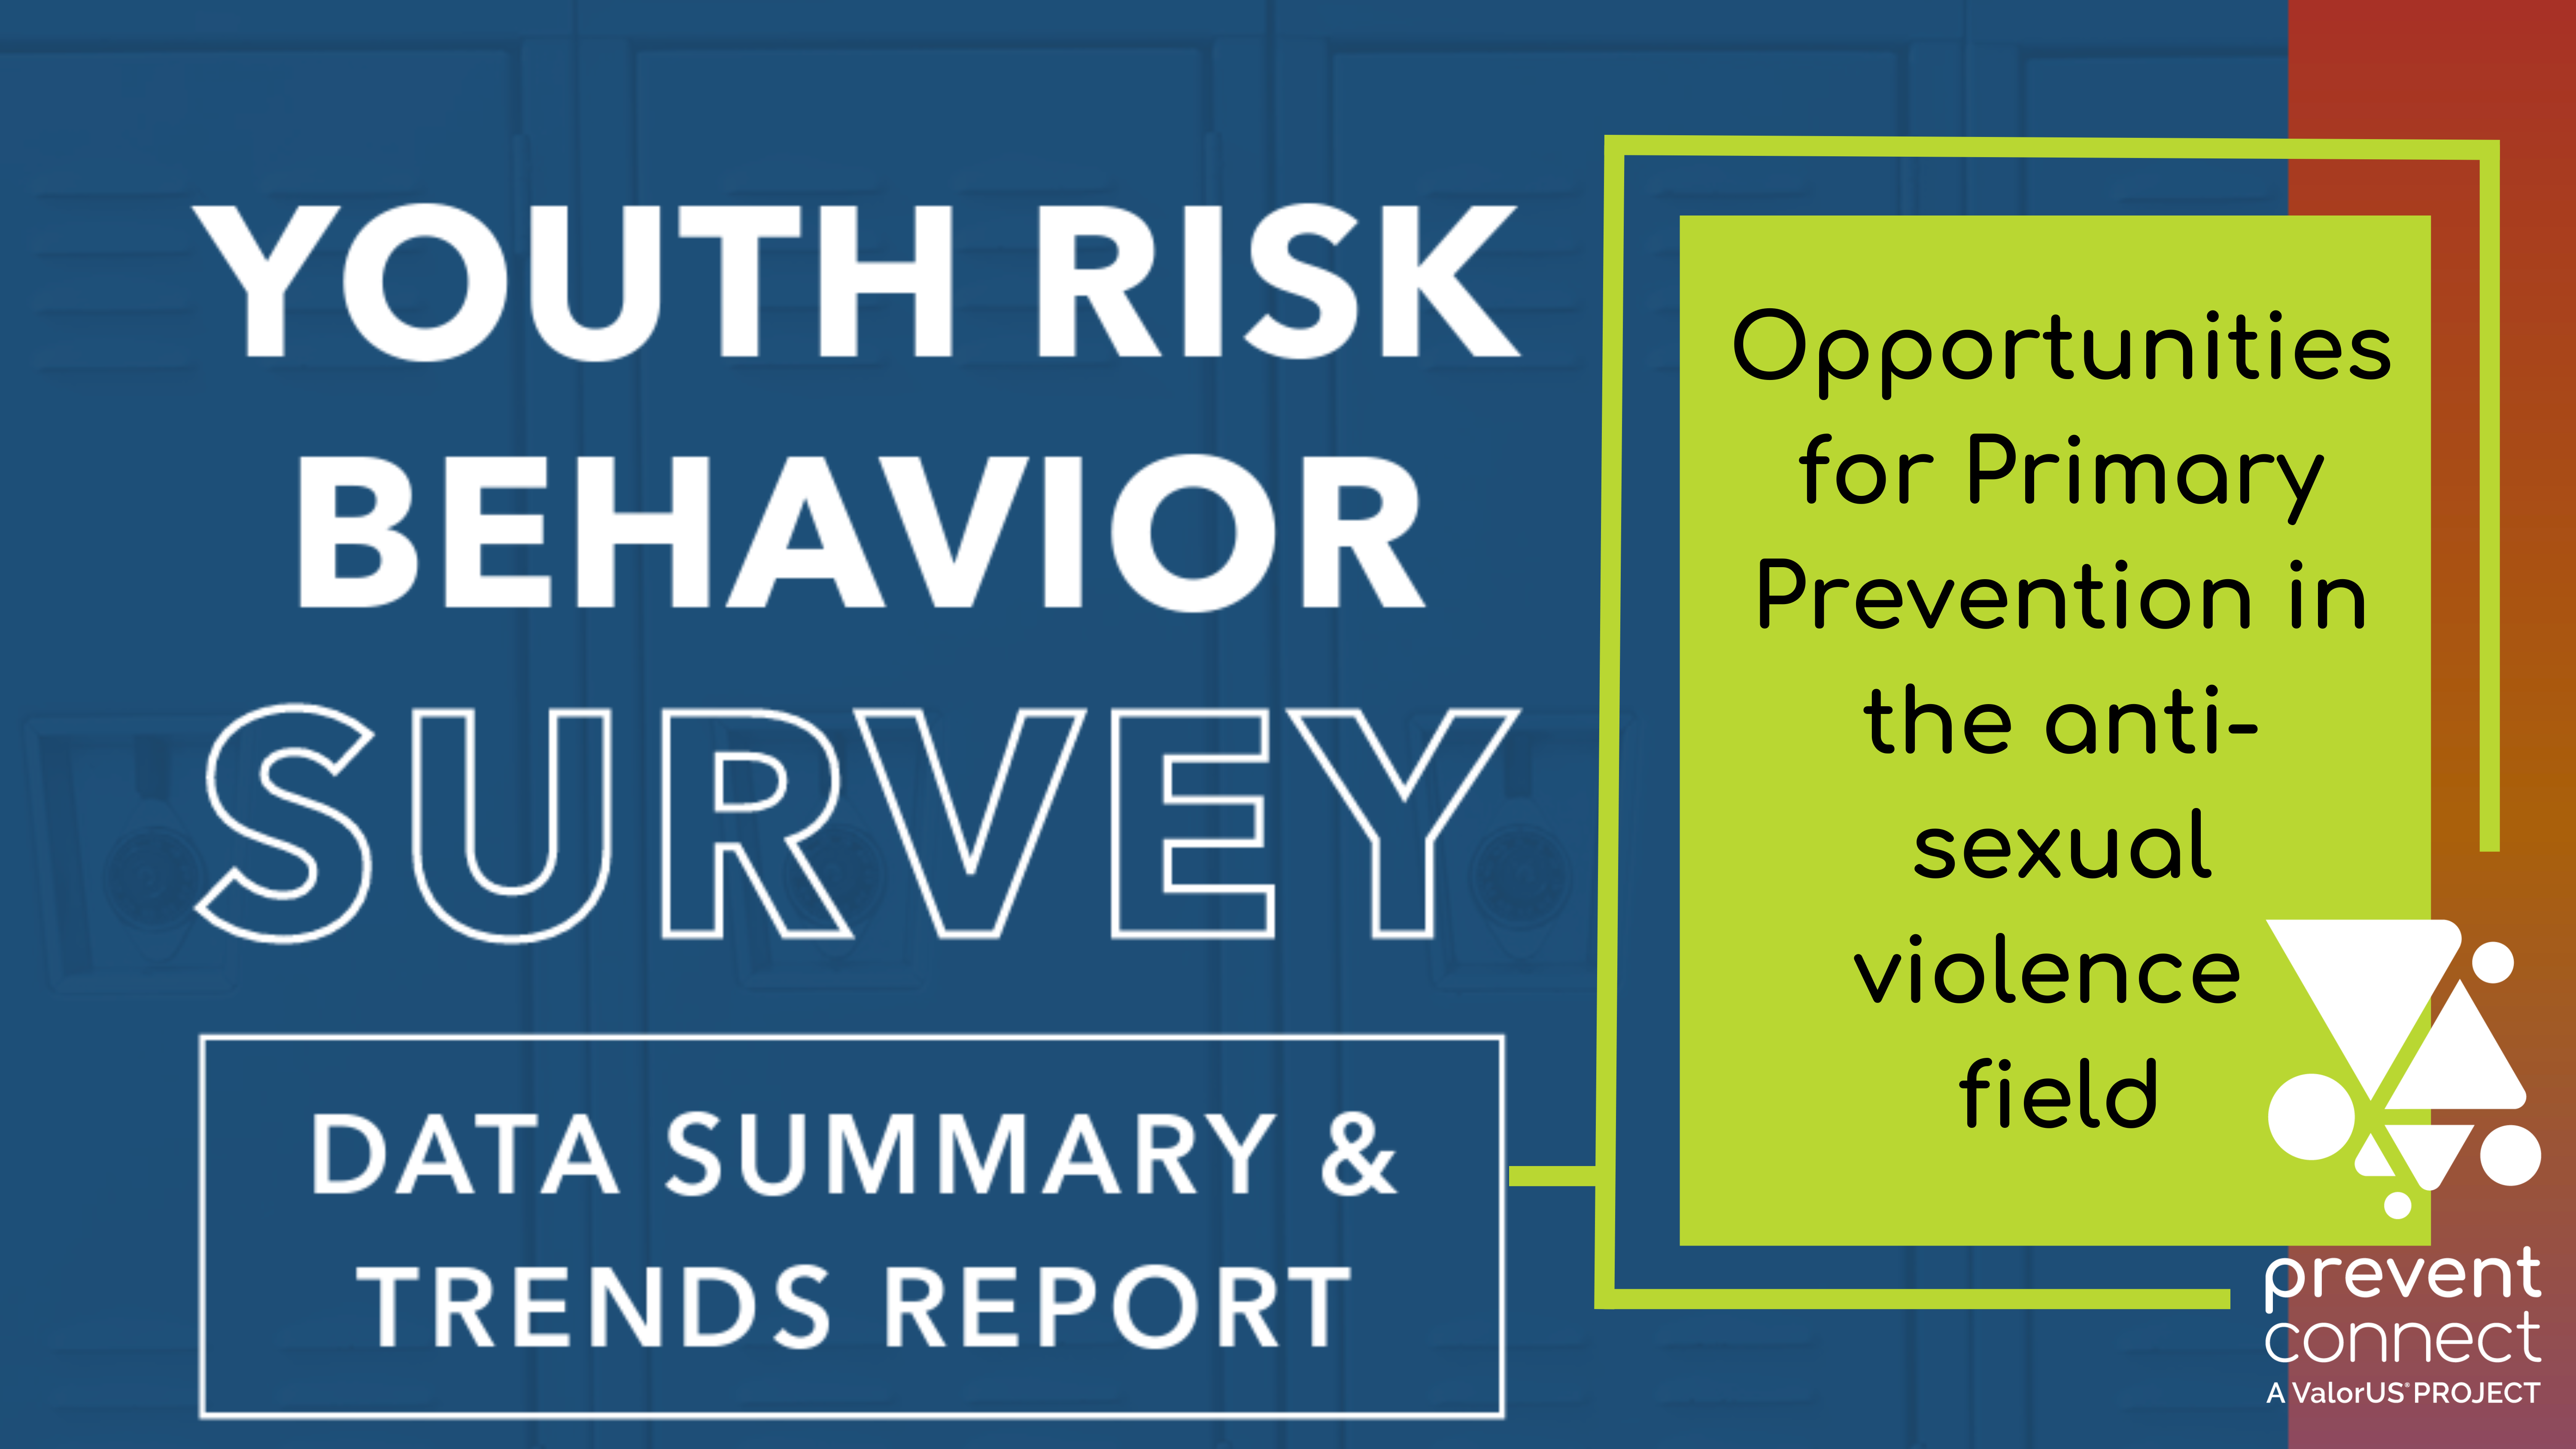 CDC outlines opportunities for Preventionists following survey on youth violence and mental health